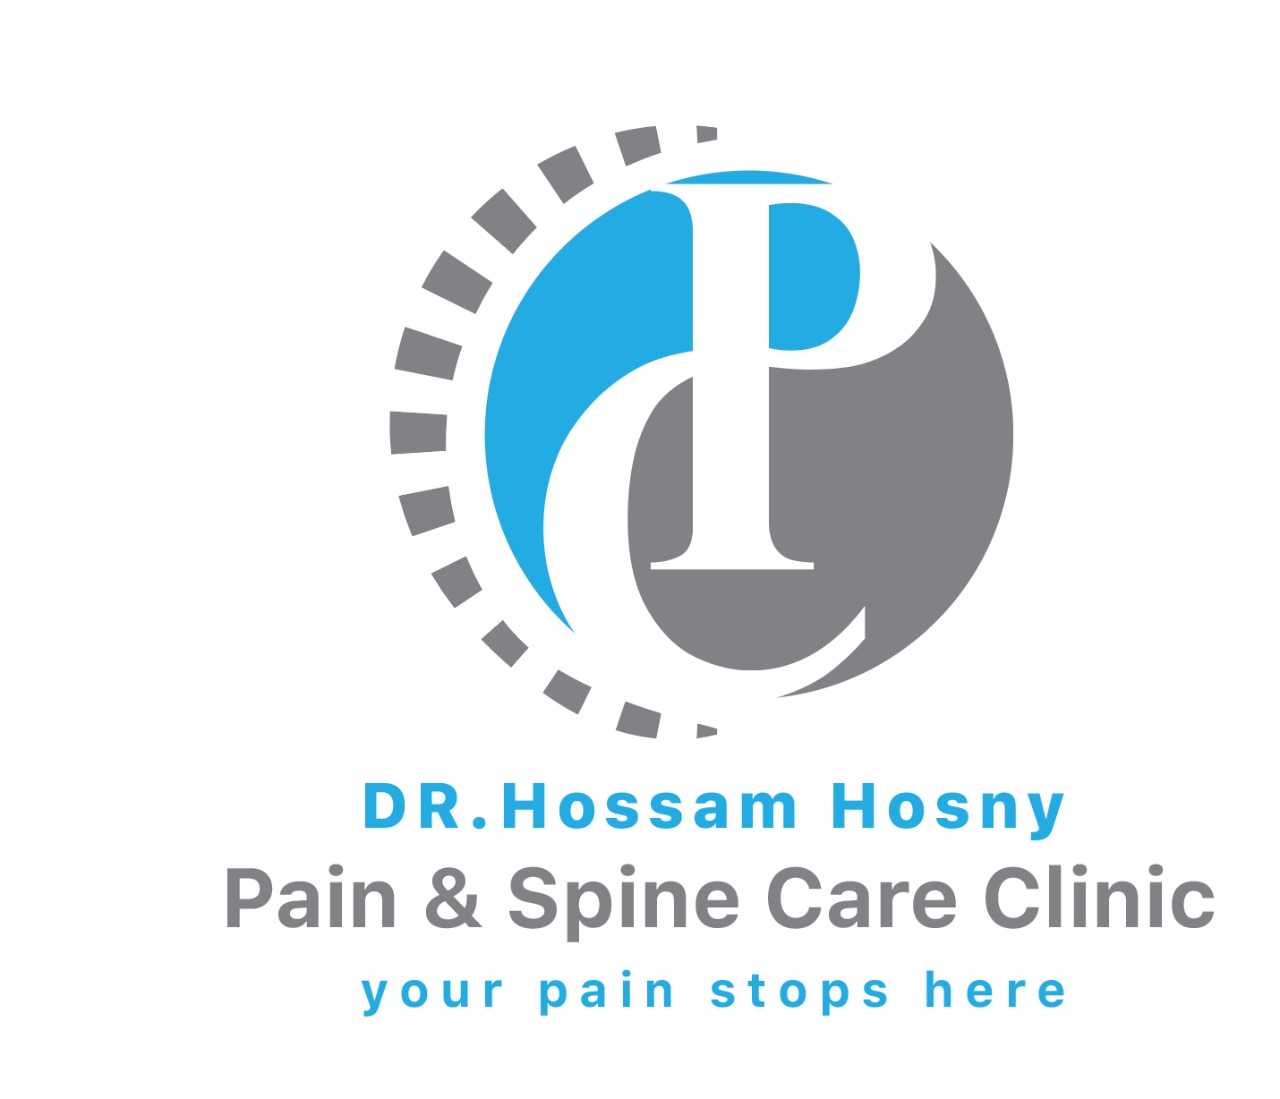 Pain Clinic and Spine Care Dr. Hossam Hosny